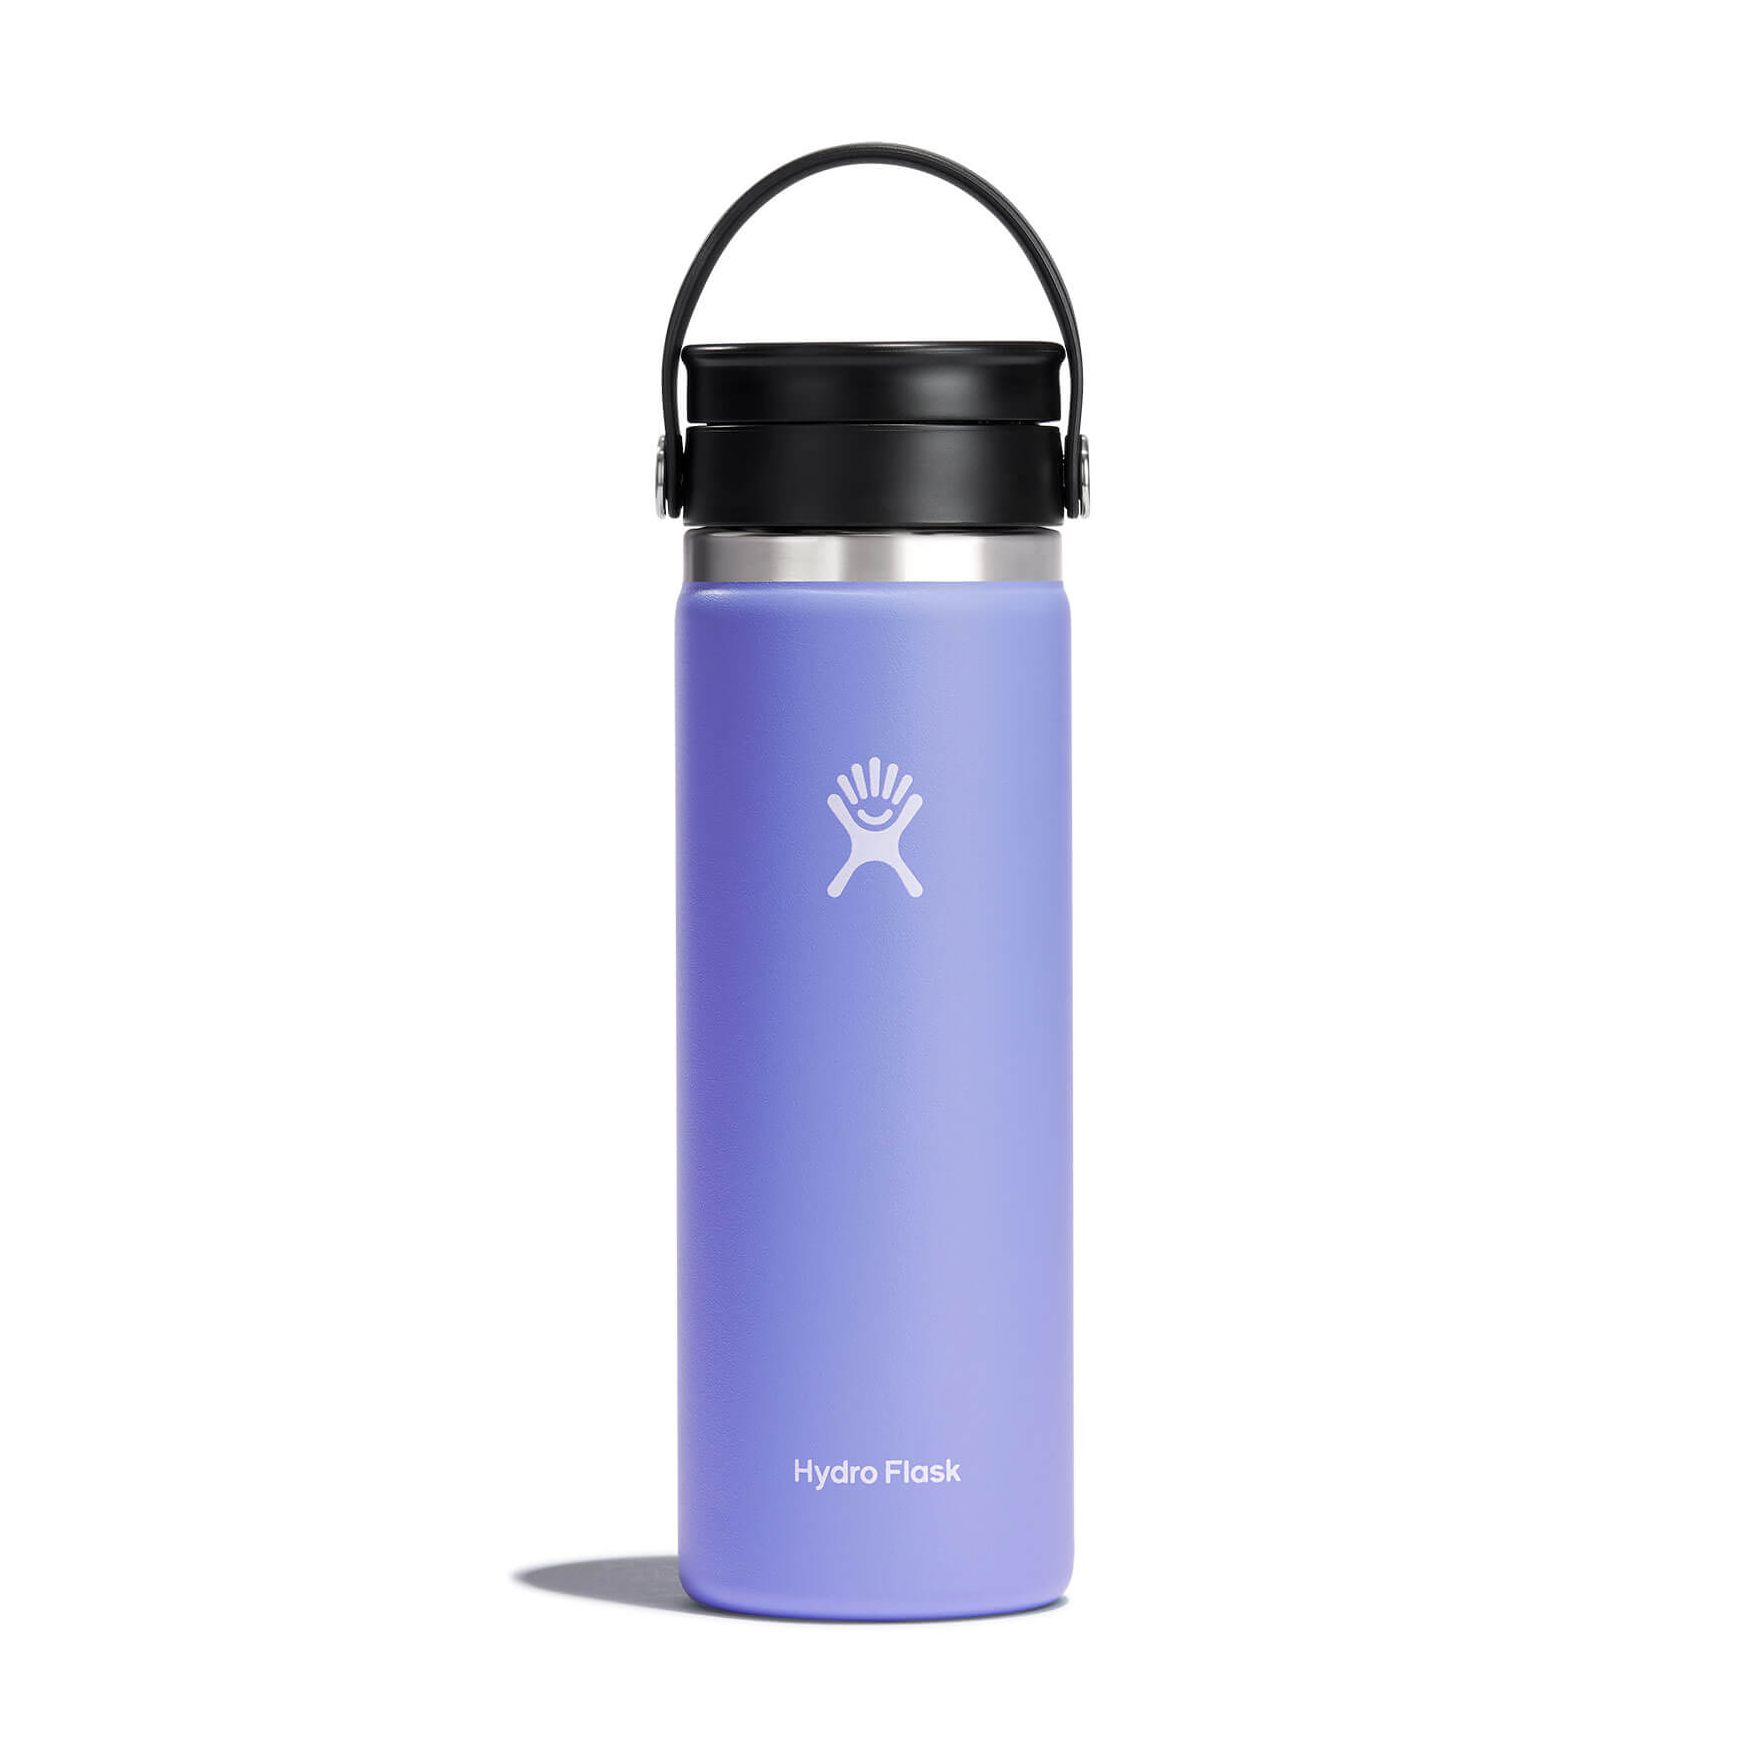  Hydro Flask Water Bottle - Stainless Steel & Vacuum Insulated -  Wide Mouth 2.0 with Leak Proof Flex Cap - 32 oz, Watermelon: Home & Kitchen